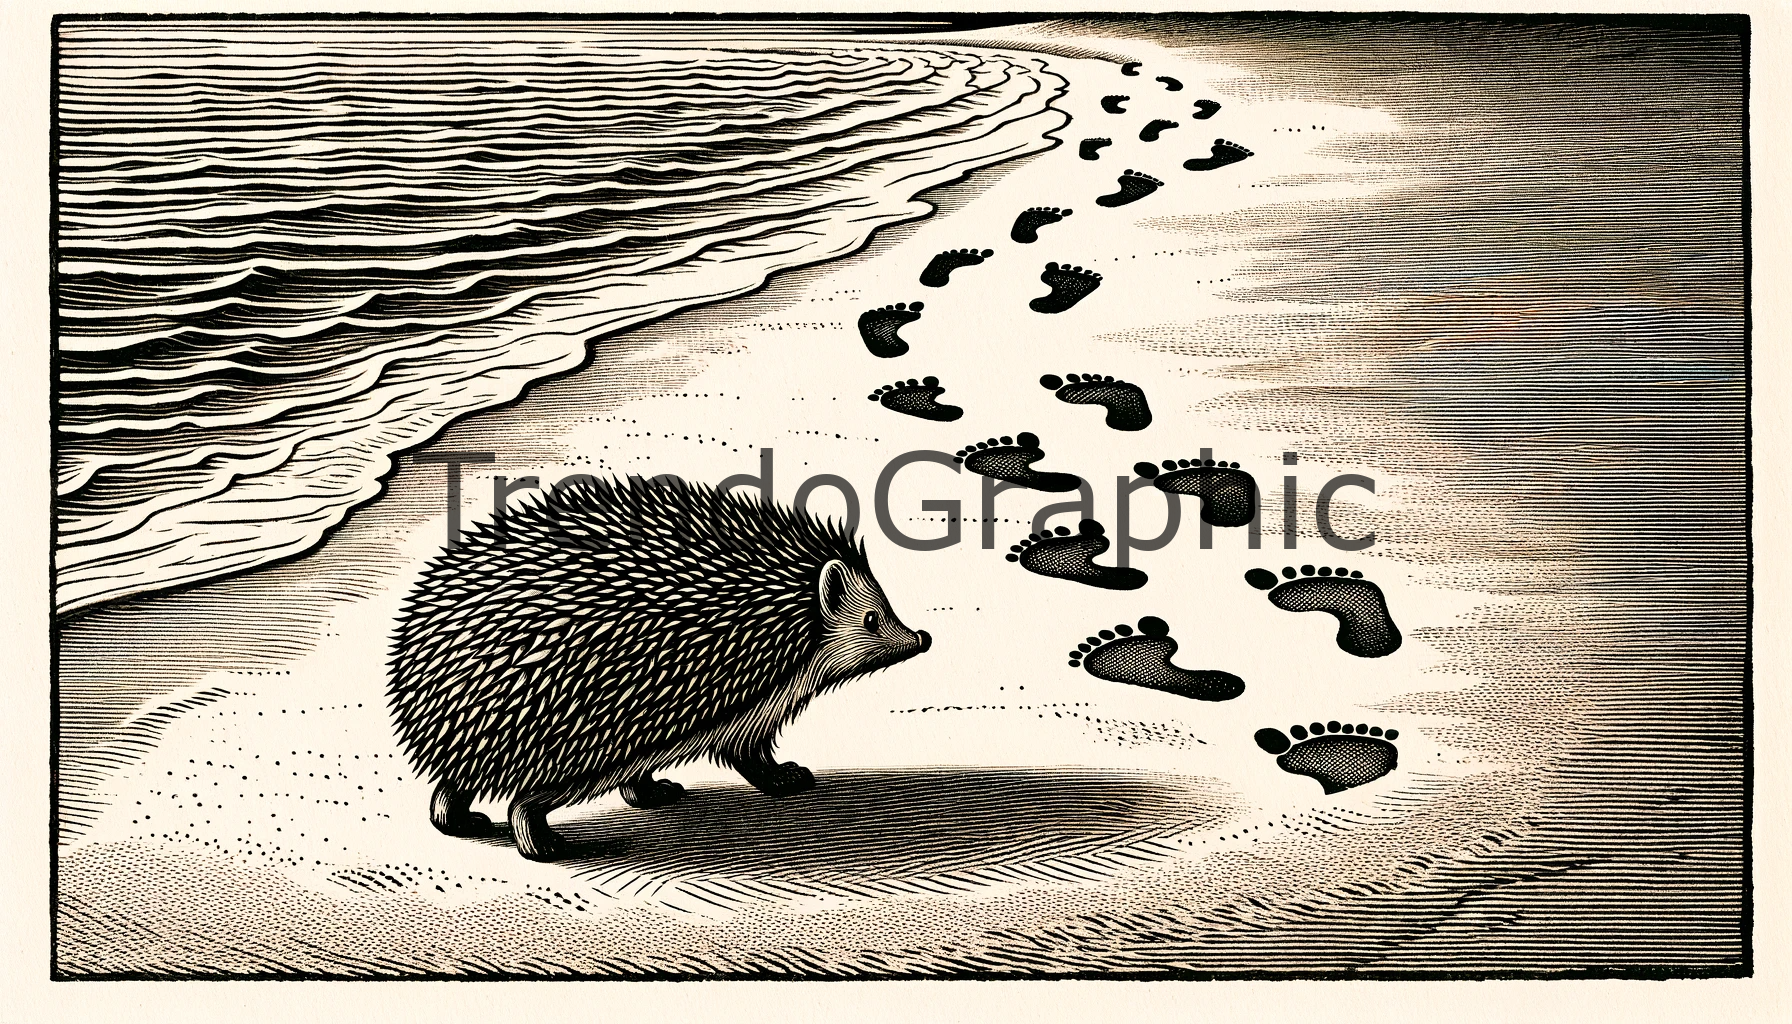 Exploring the Tiny Tracks: A Hedgehog’s Footprints in the Sand